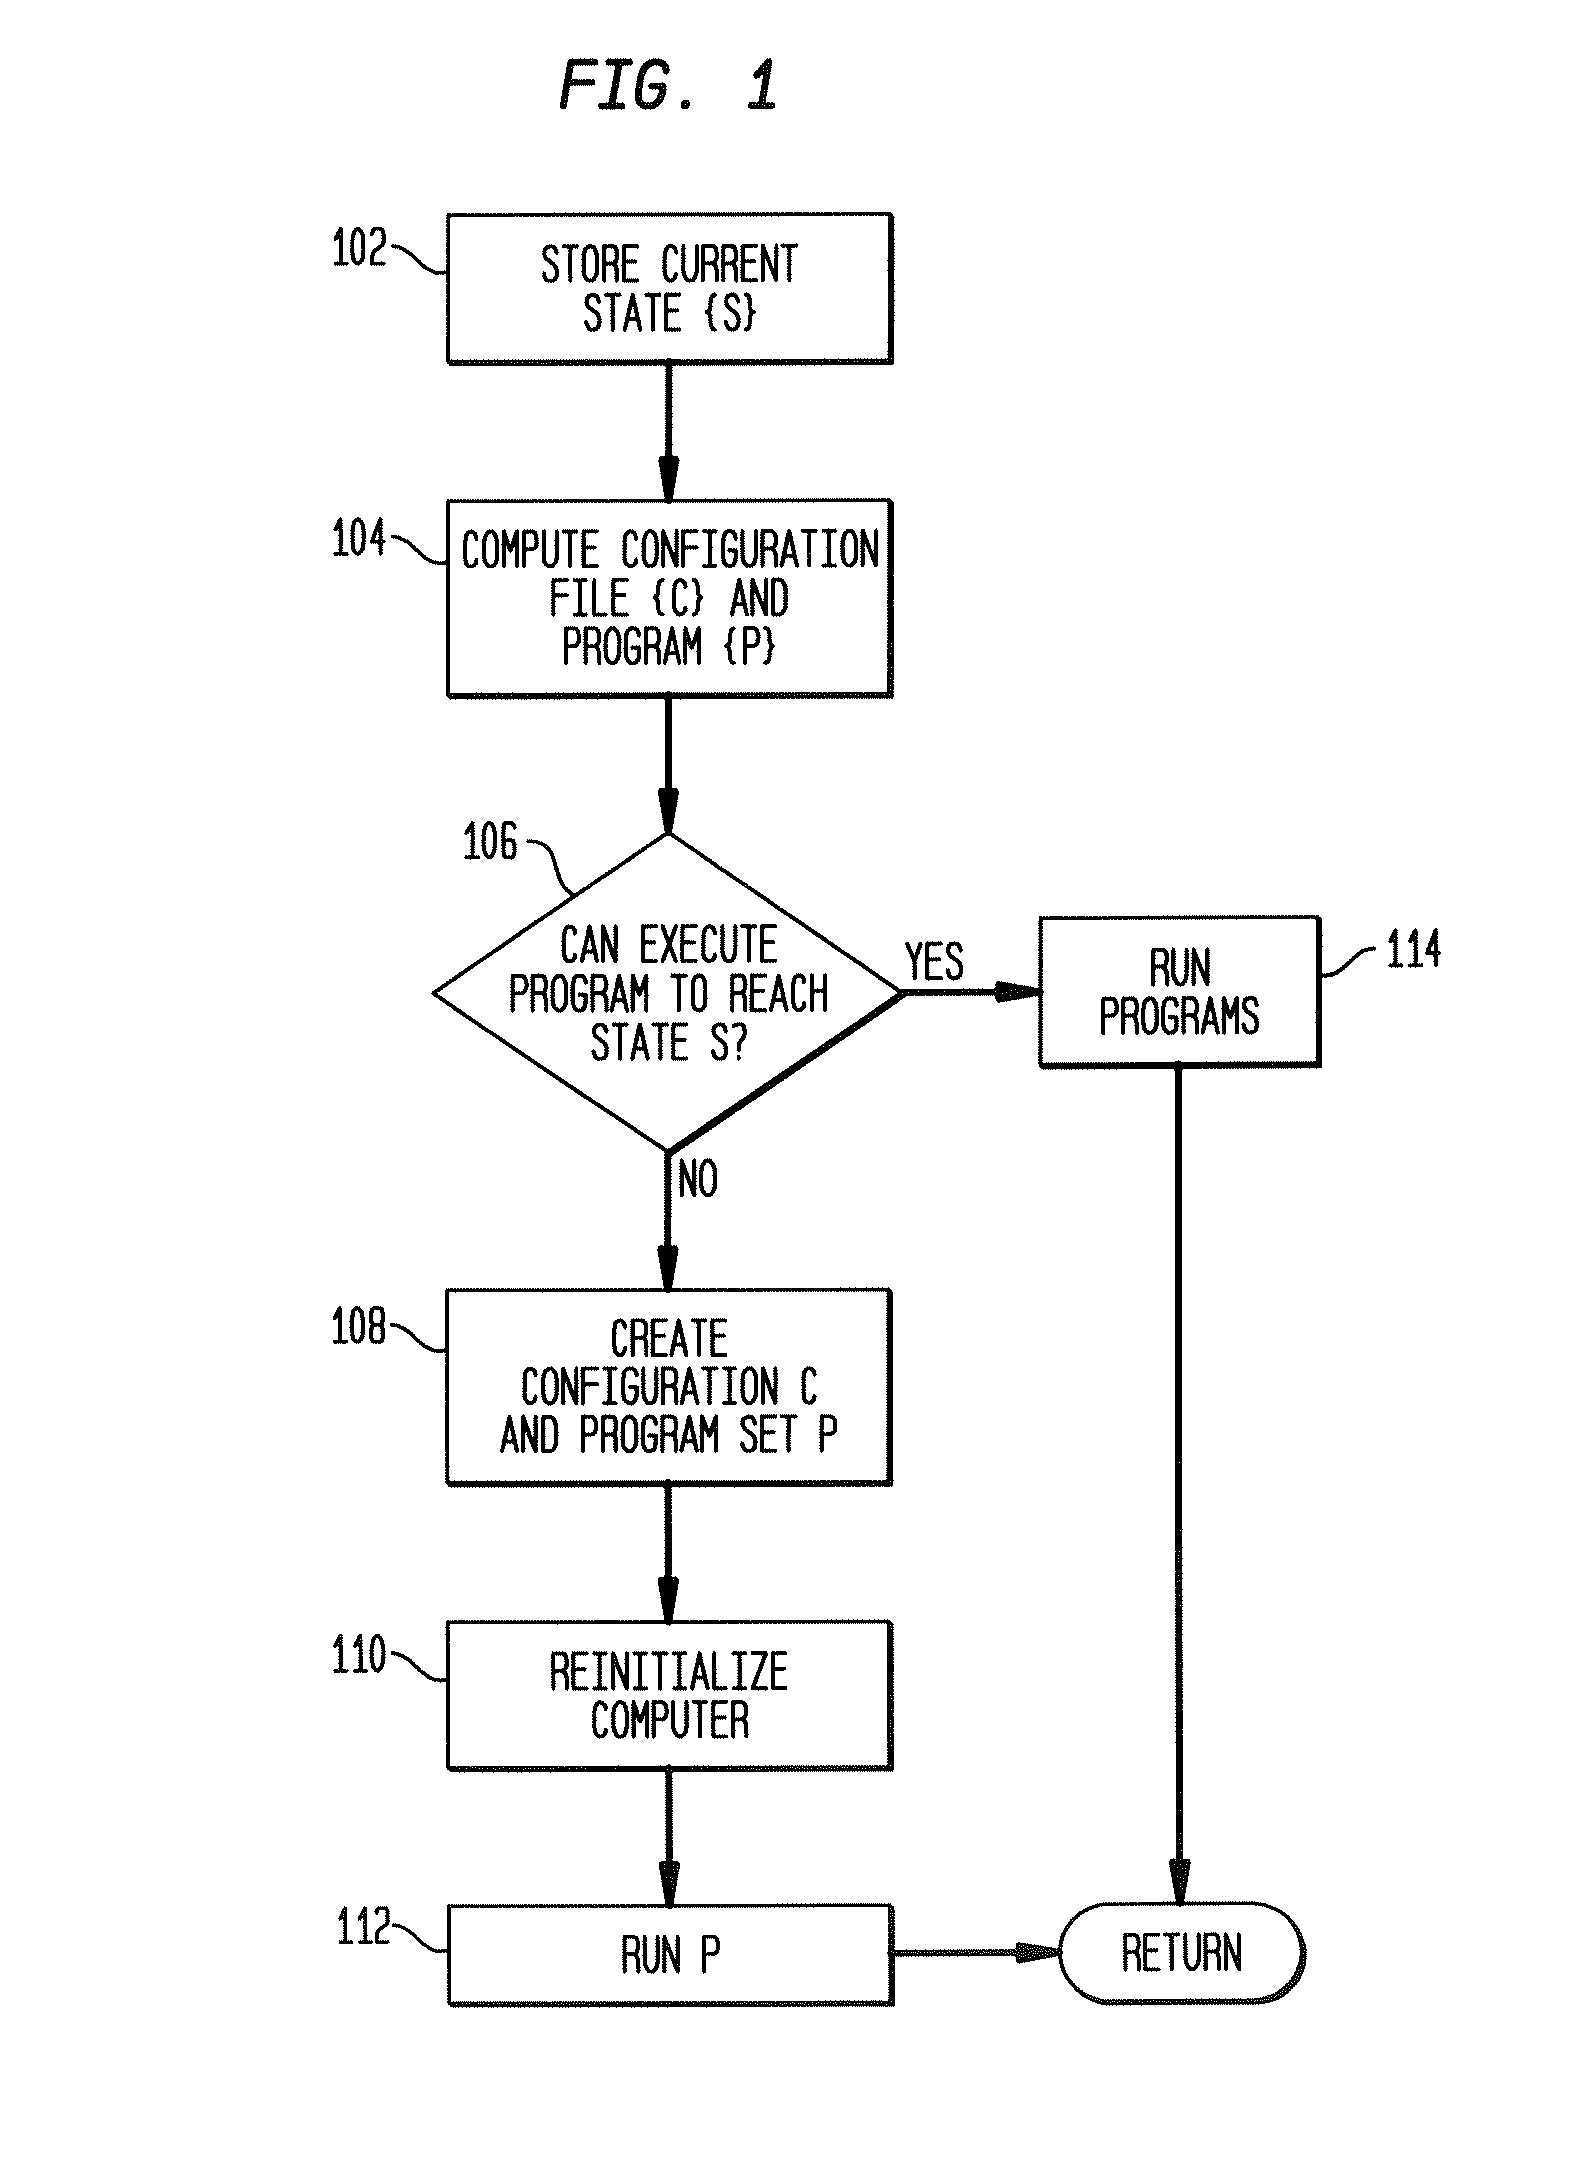 Computer configuration tracking system able to restore a previous configuration